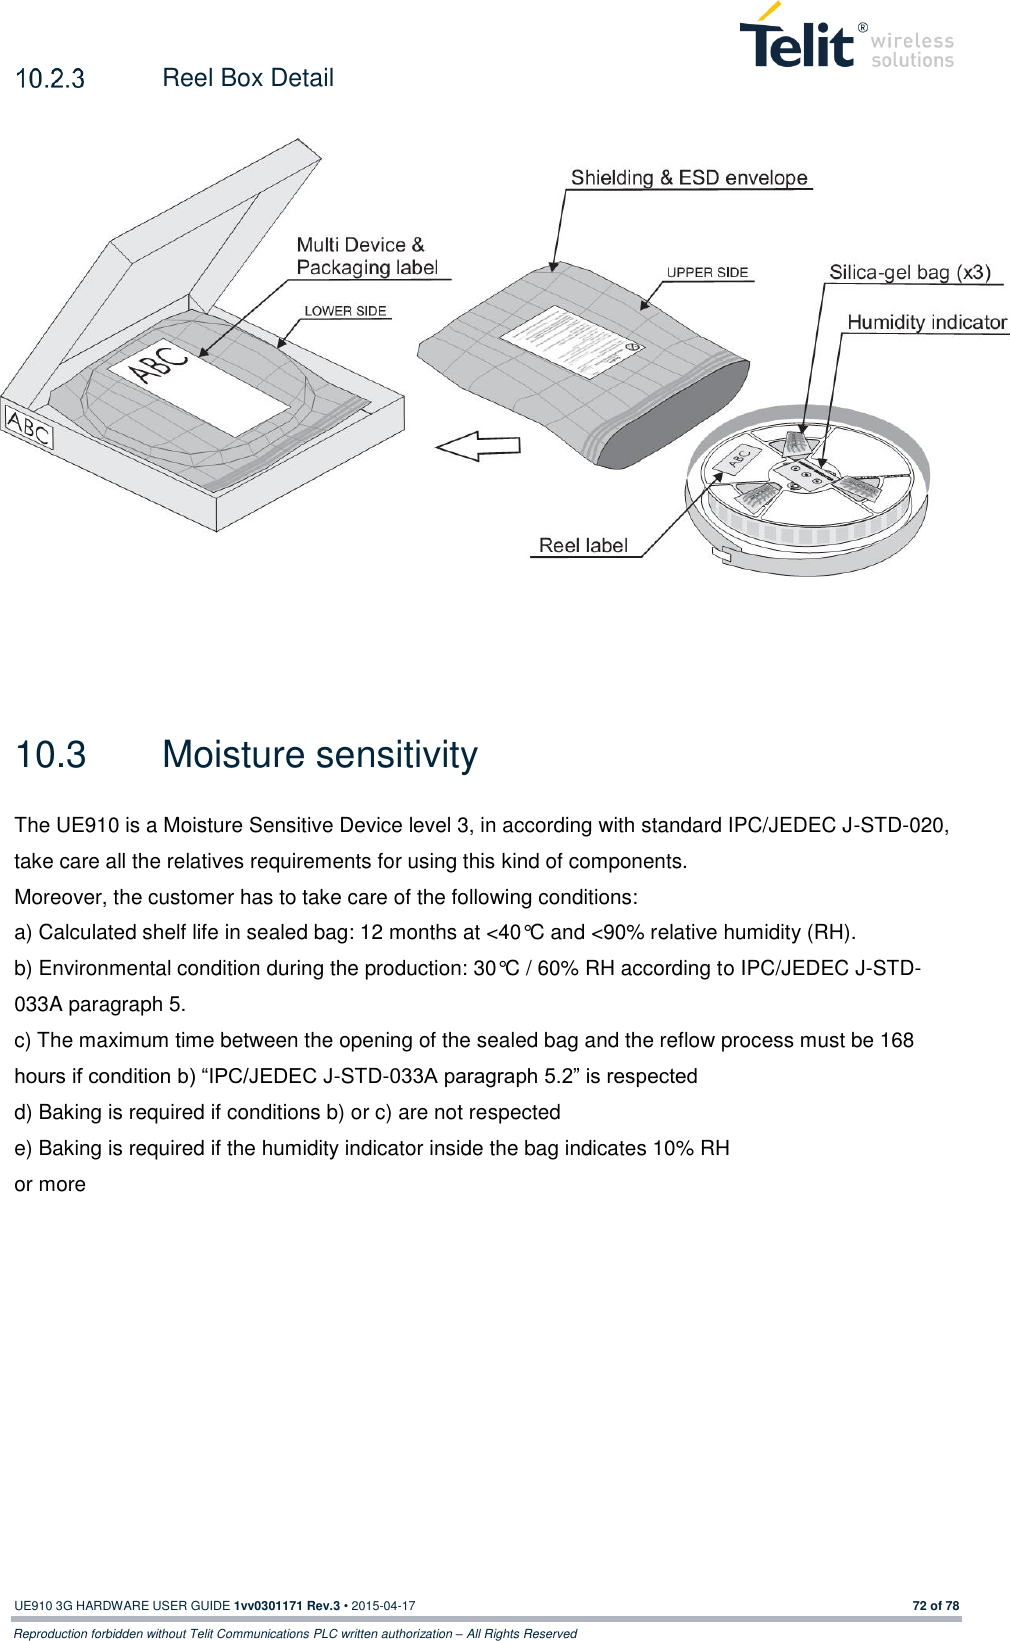  UE910 3G HARDWARE USER GUIDE 1vv0301171 Rev.3 • 2015-04-17 72 of 78 Reproduction forbidden without Telit Communications PLC written authorization – All Rights Reserved   Reel Box Detail    10.3  Moisture sensitivity   The UE910 is a Moisture Sensitive Device level 3, in according with standard IPC/JEDEC J-STD-020, take care all the relatives requirements for using this kind of components. Moreover, the customer has to take care of the following conditions: a) Calculated shelf life in sealed bag: 12 months at &lt;40°C and &lt;90% relative humidity (RH). b) Environmental condition during the production: 30°C / 60% RH according to IPC/JEDEC J-STD-033A paragraph 5. c) The maximum time between the opening of the sealed bag and the reflow process must be 168 hours if condition b) “IPC/JEDEC J-STD-033A paragraph 5.2” is respected d) Baking is required if conditions b) or c) are not respected e) Baking is required if the humidity indicator inside the bag indicates 10% RH or more      